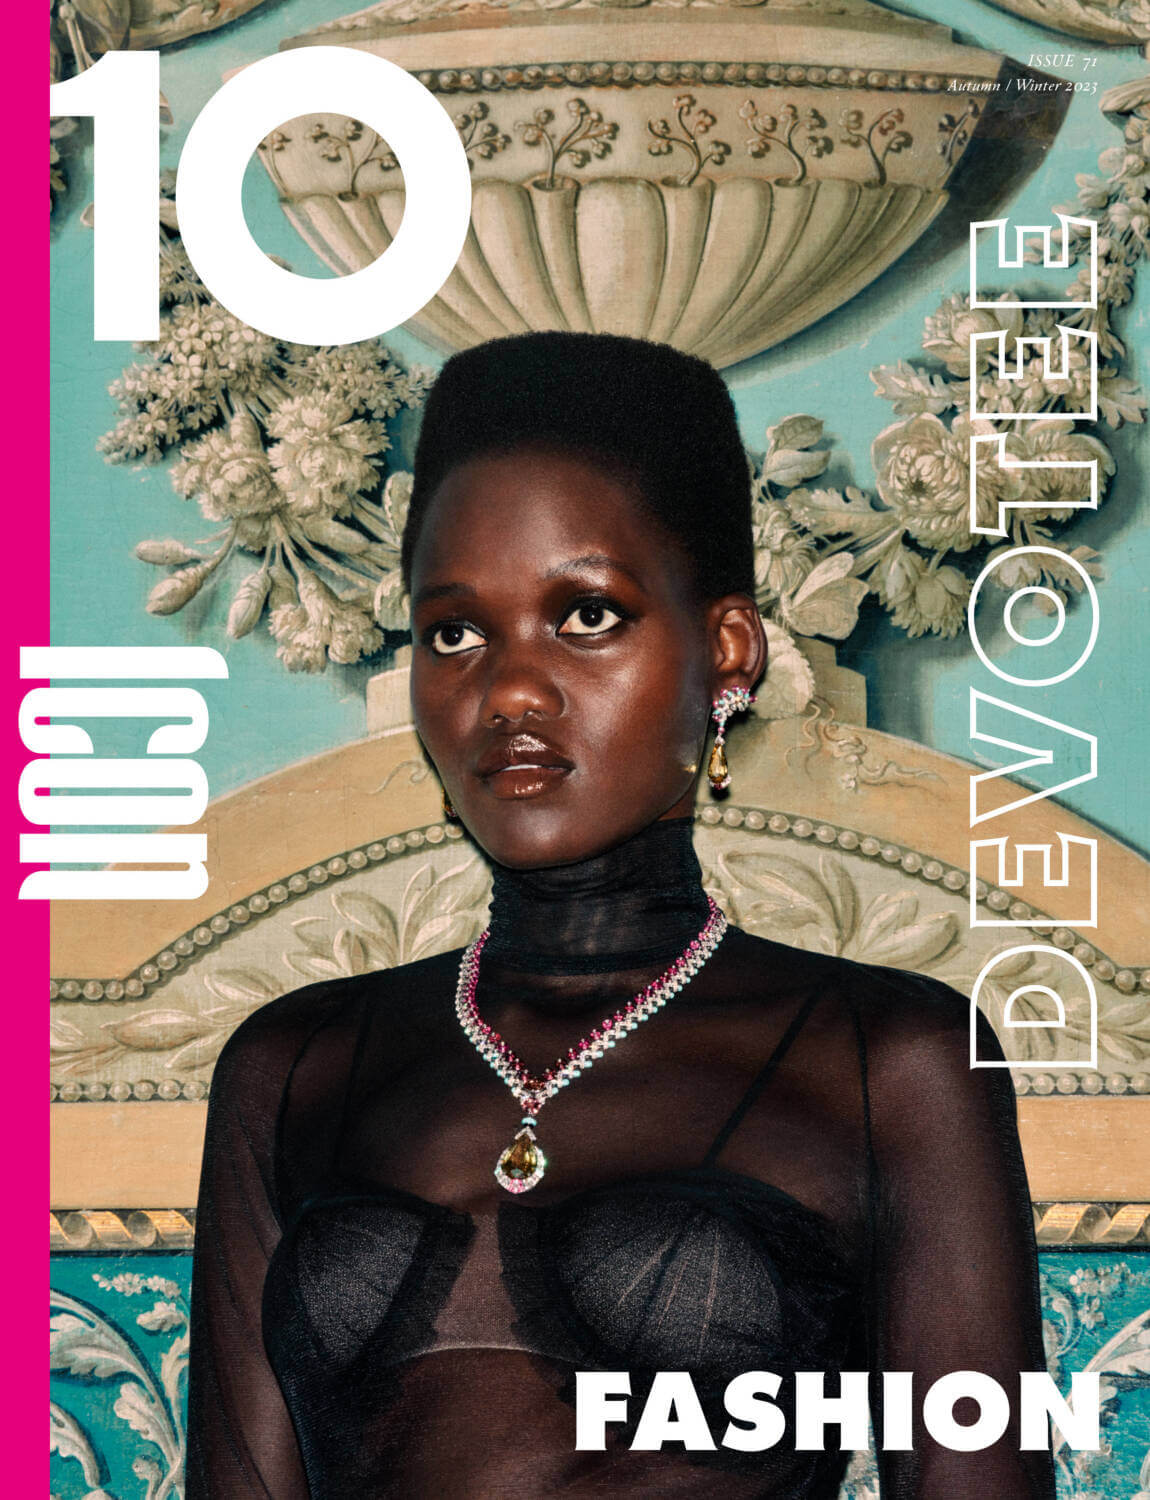 10 Magazine Issue 71 – Louis Vuitton Cover